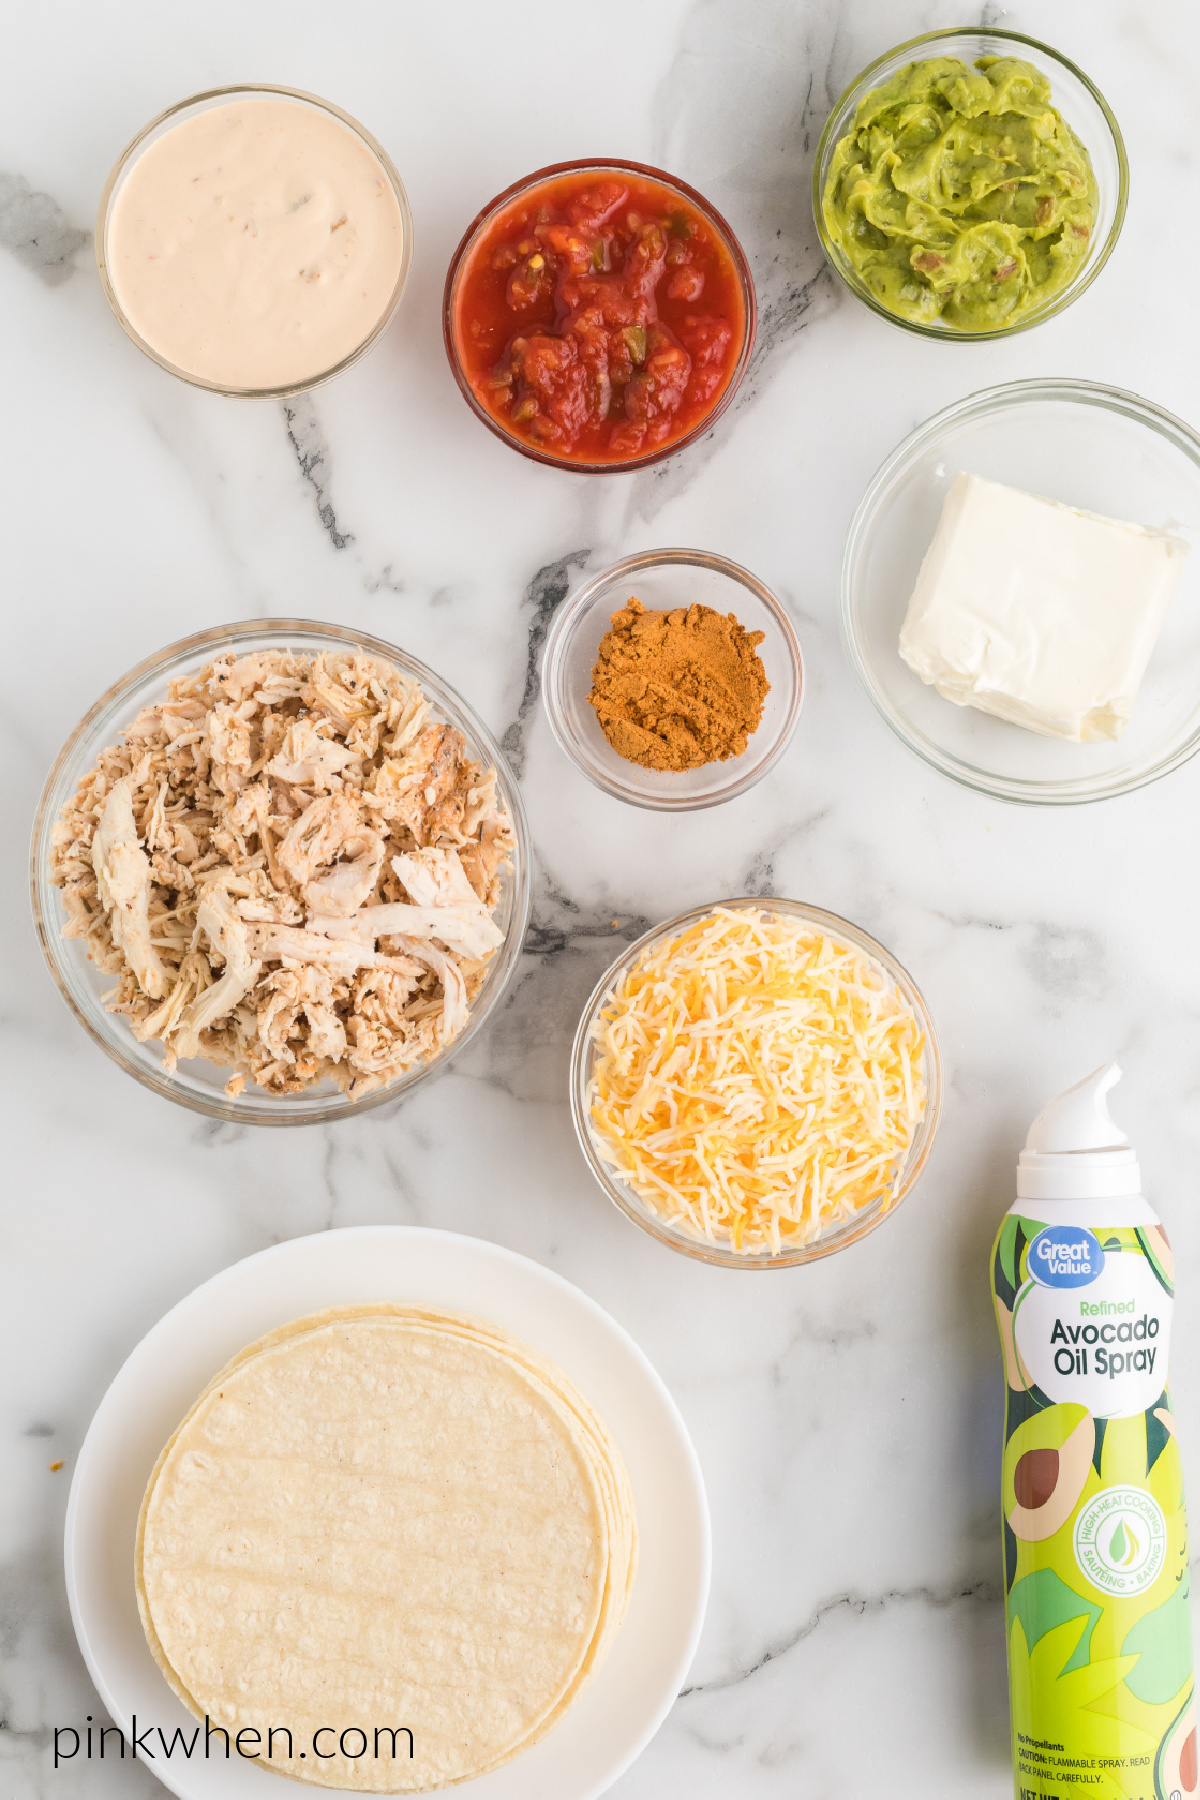 tortillas, chicken, cheese, cream cheese, taco seasoning, and other ingredients used to make chicken taquitos.